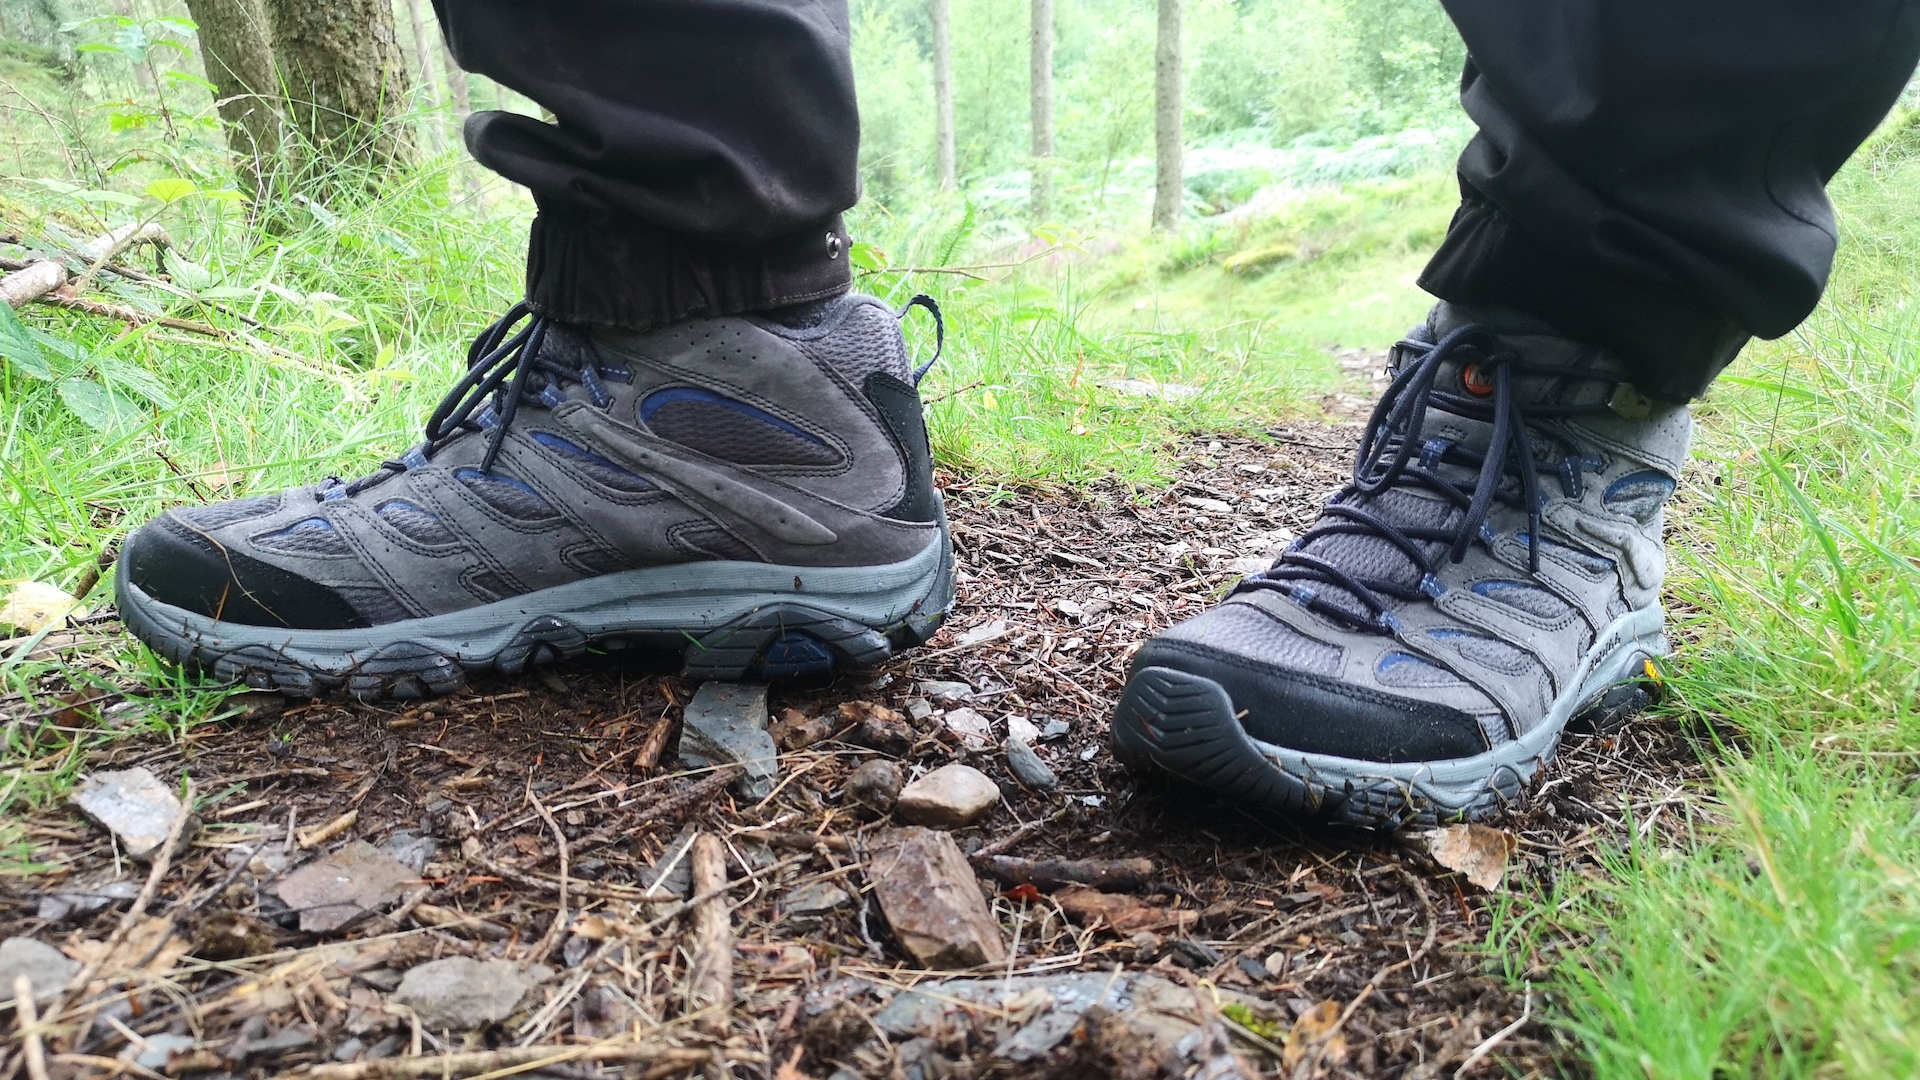 Merrell Moab 3 Mid GTX hiking boots review | Advnture